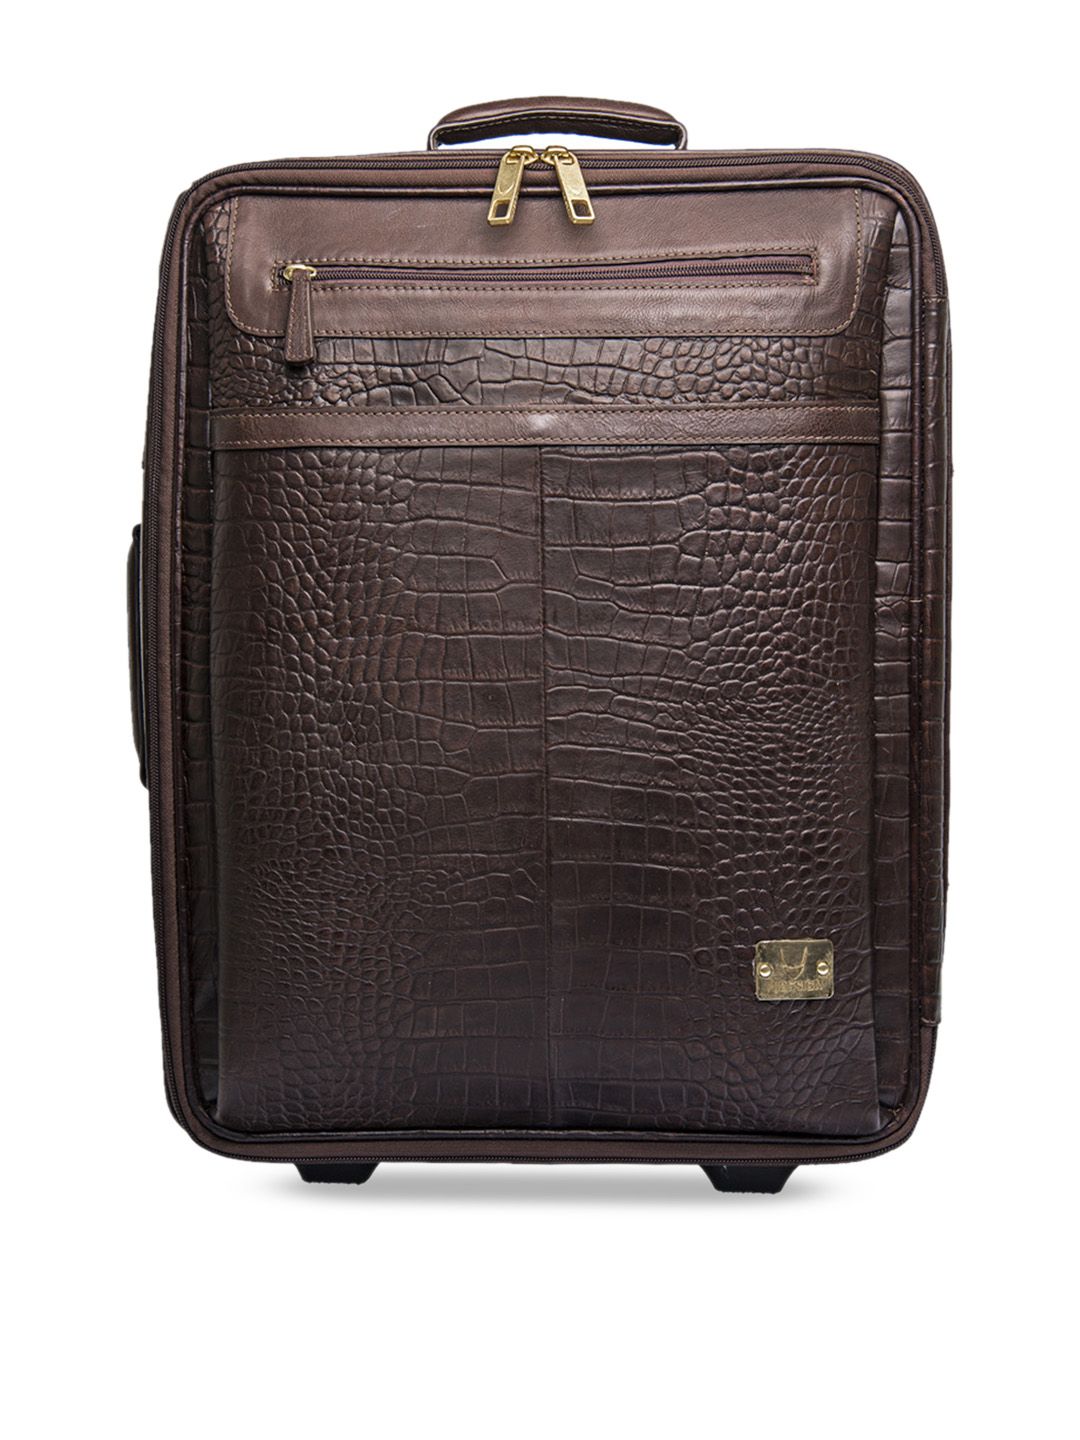 Hidesign Unisex Coffee Brown Textured Leather Cabin Trolley Suitcase Price in India